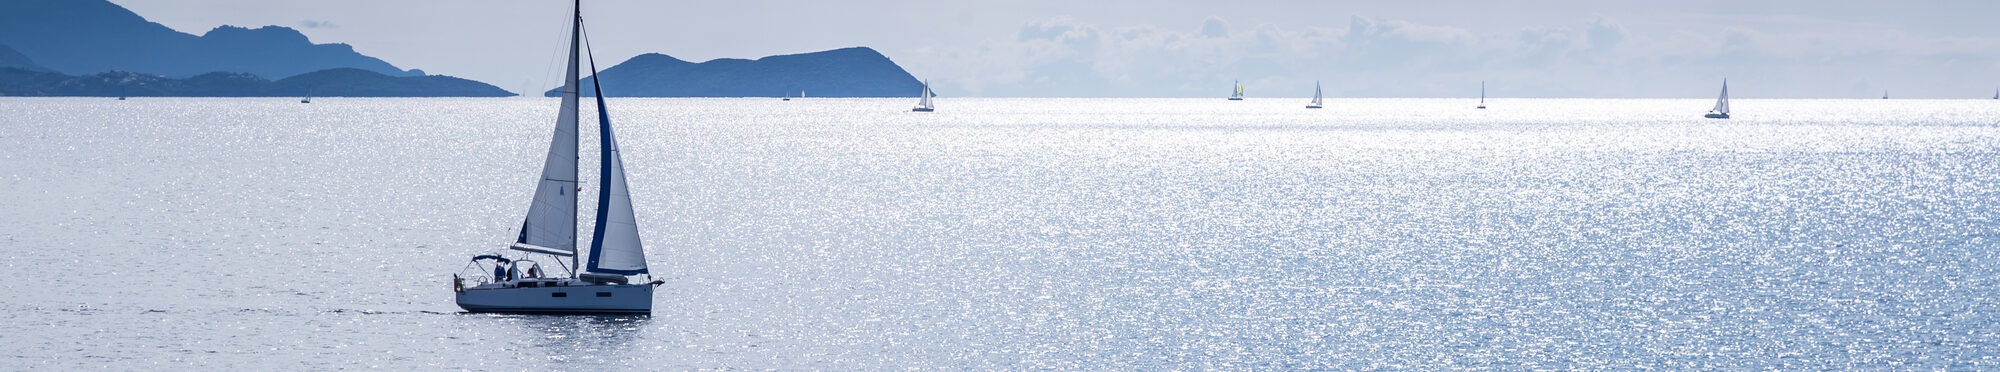 Sailing boat on blue sea waters with clear blue sky